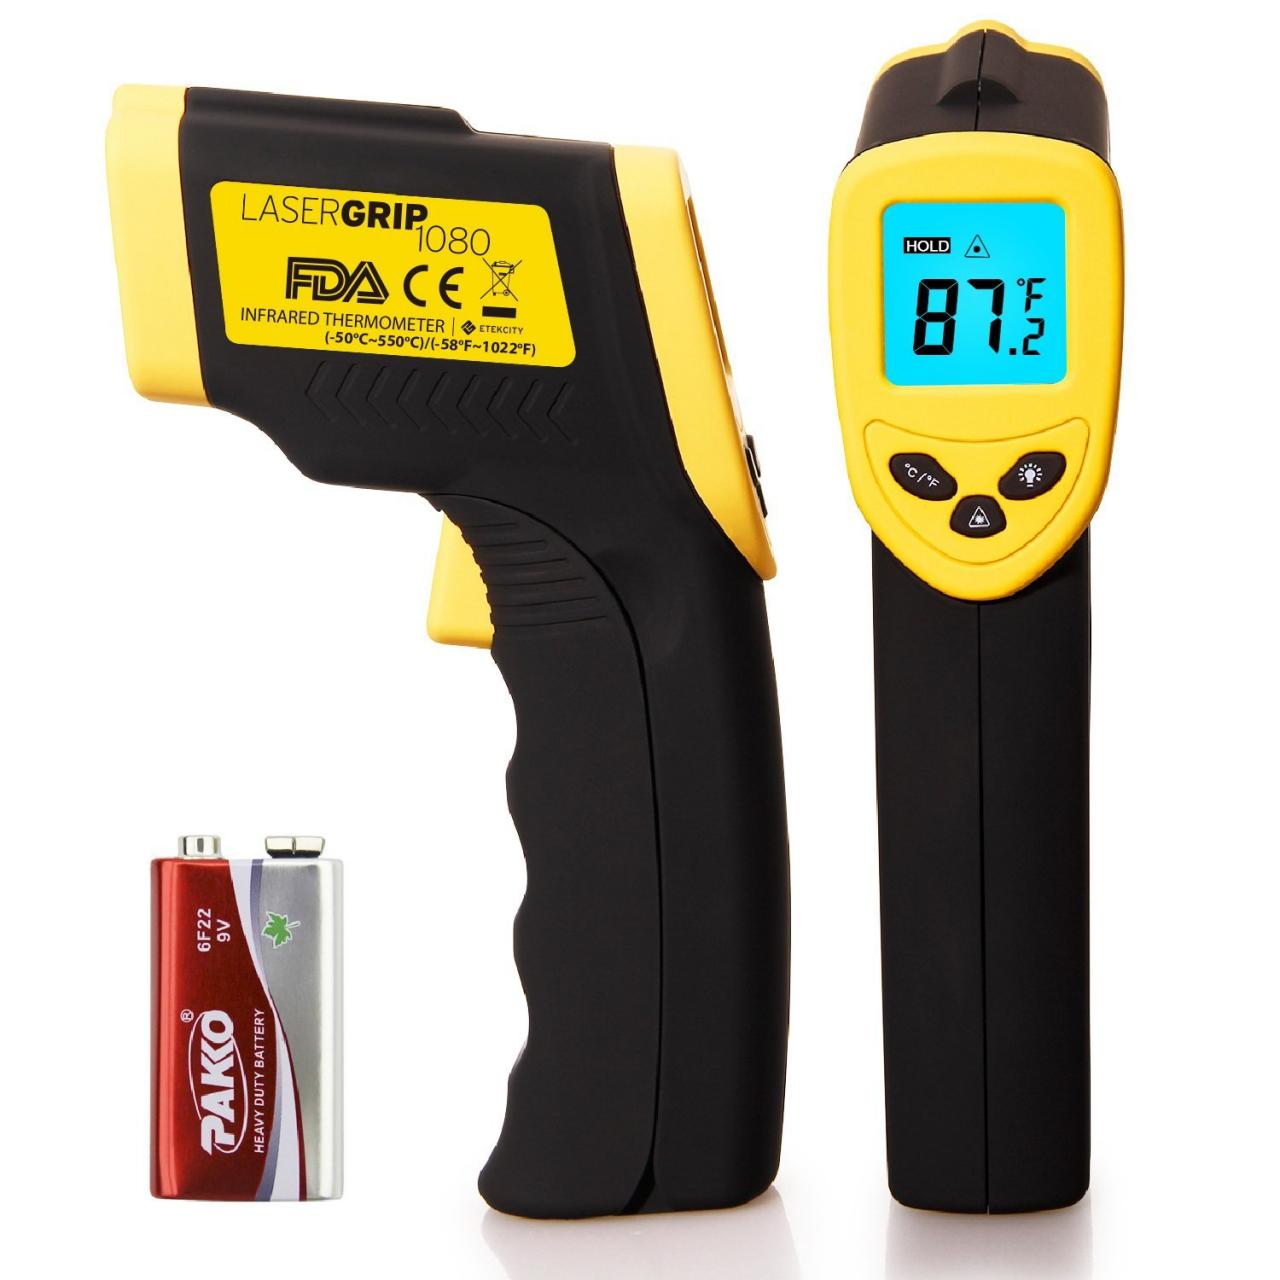 Etekcity Lasergrip 1080 Infrared Thermometer Review - Thermometer Reviews